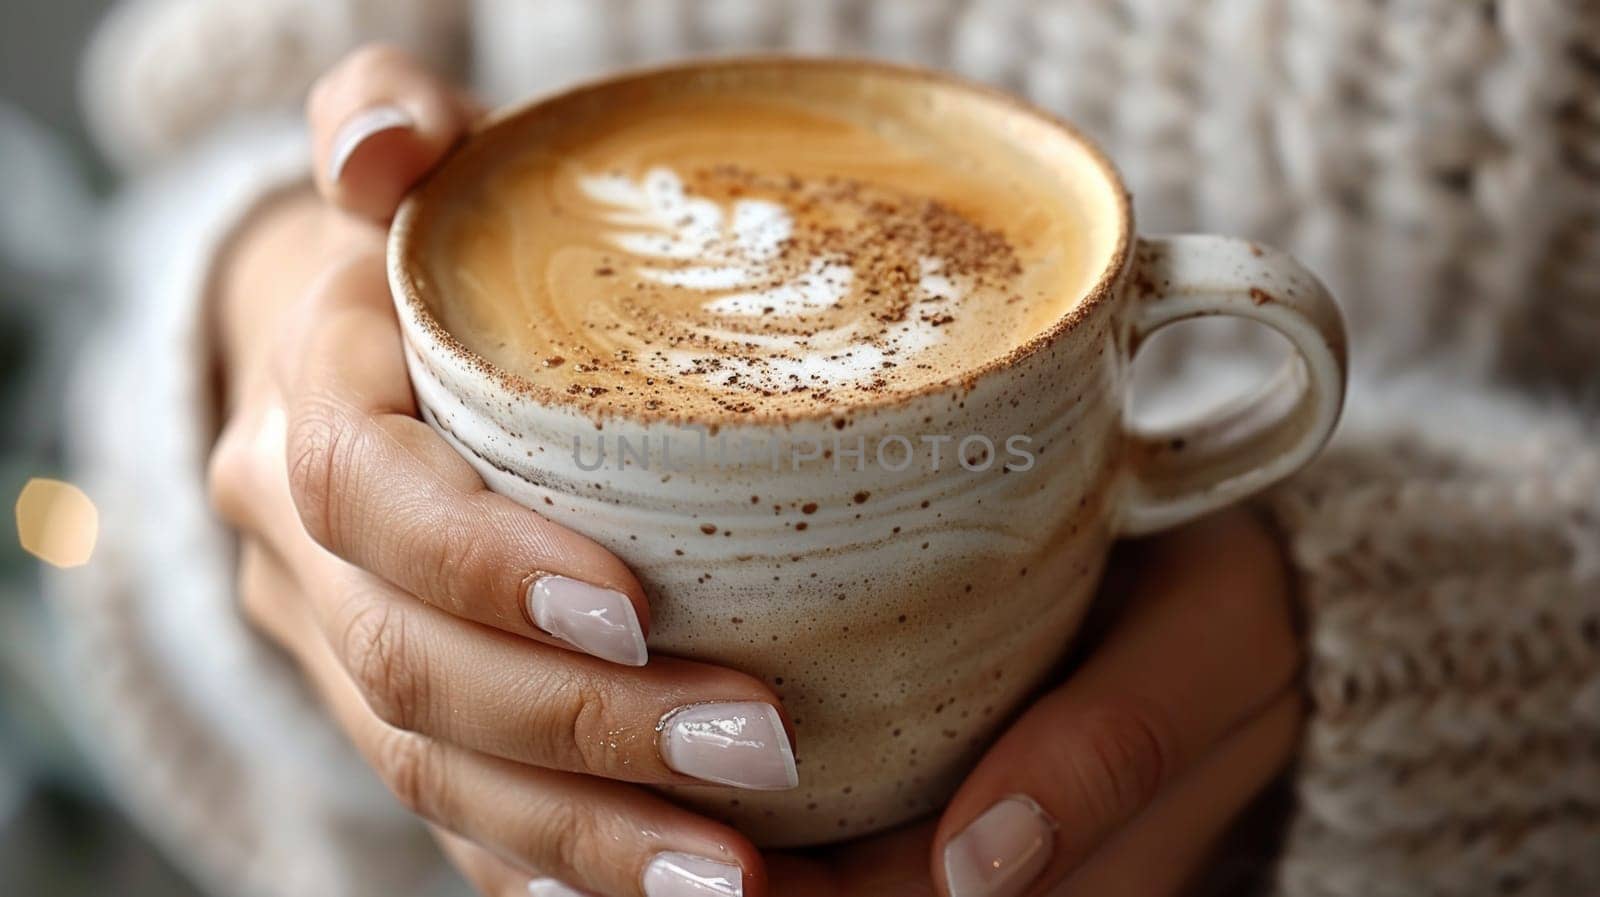 A woman holding a coffee cup with latte art on it